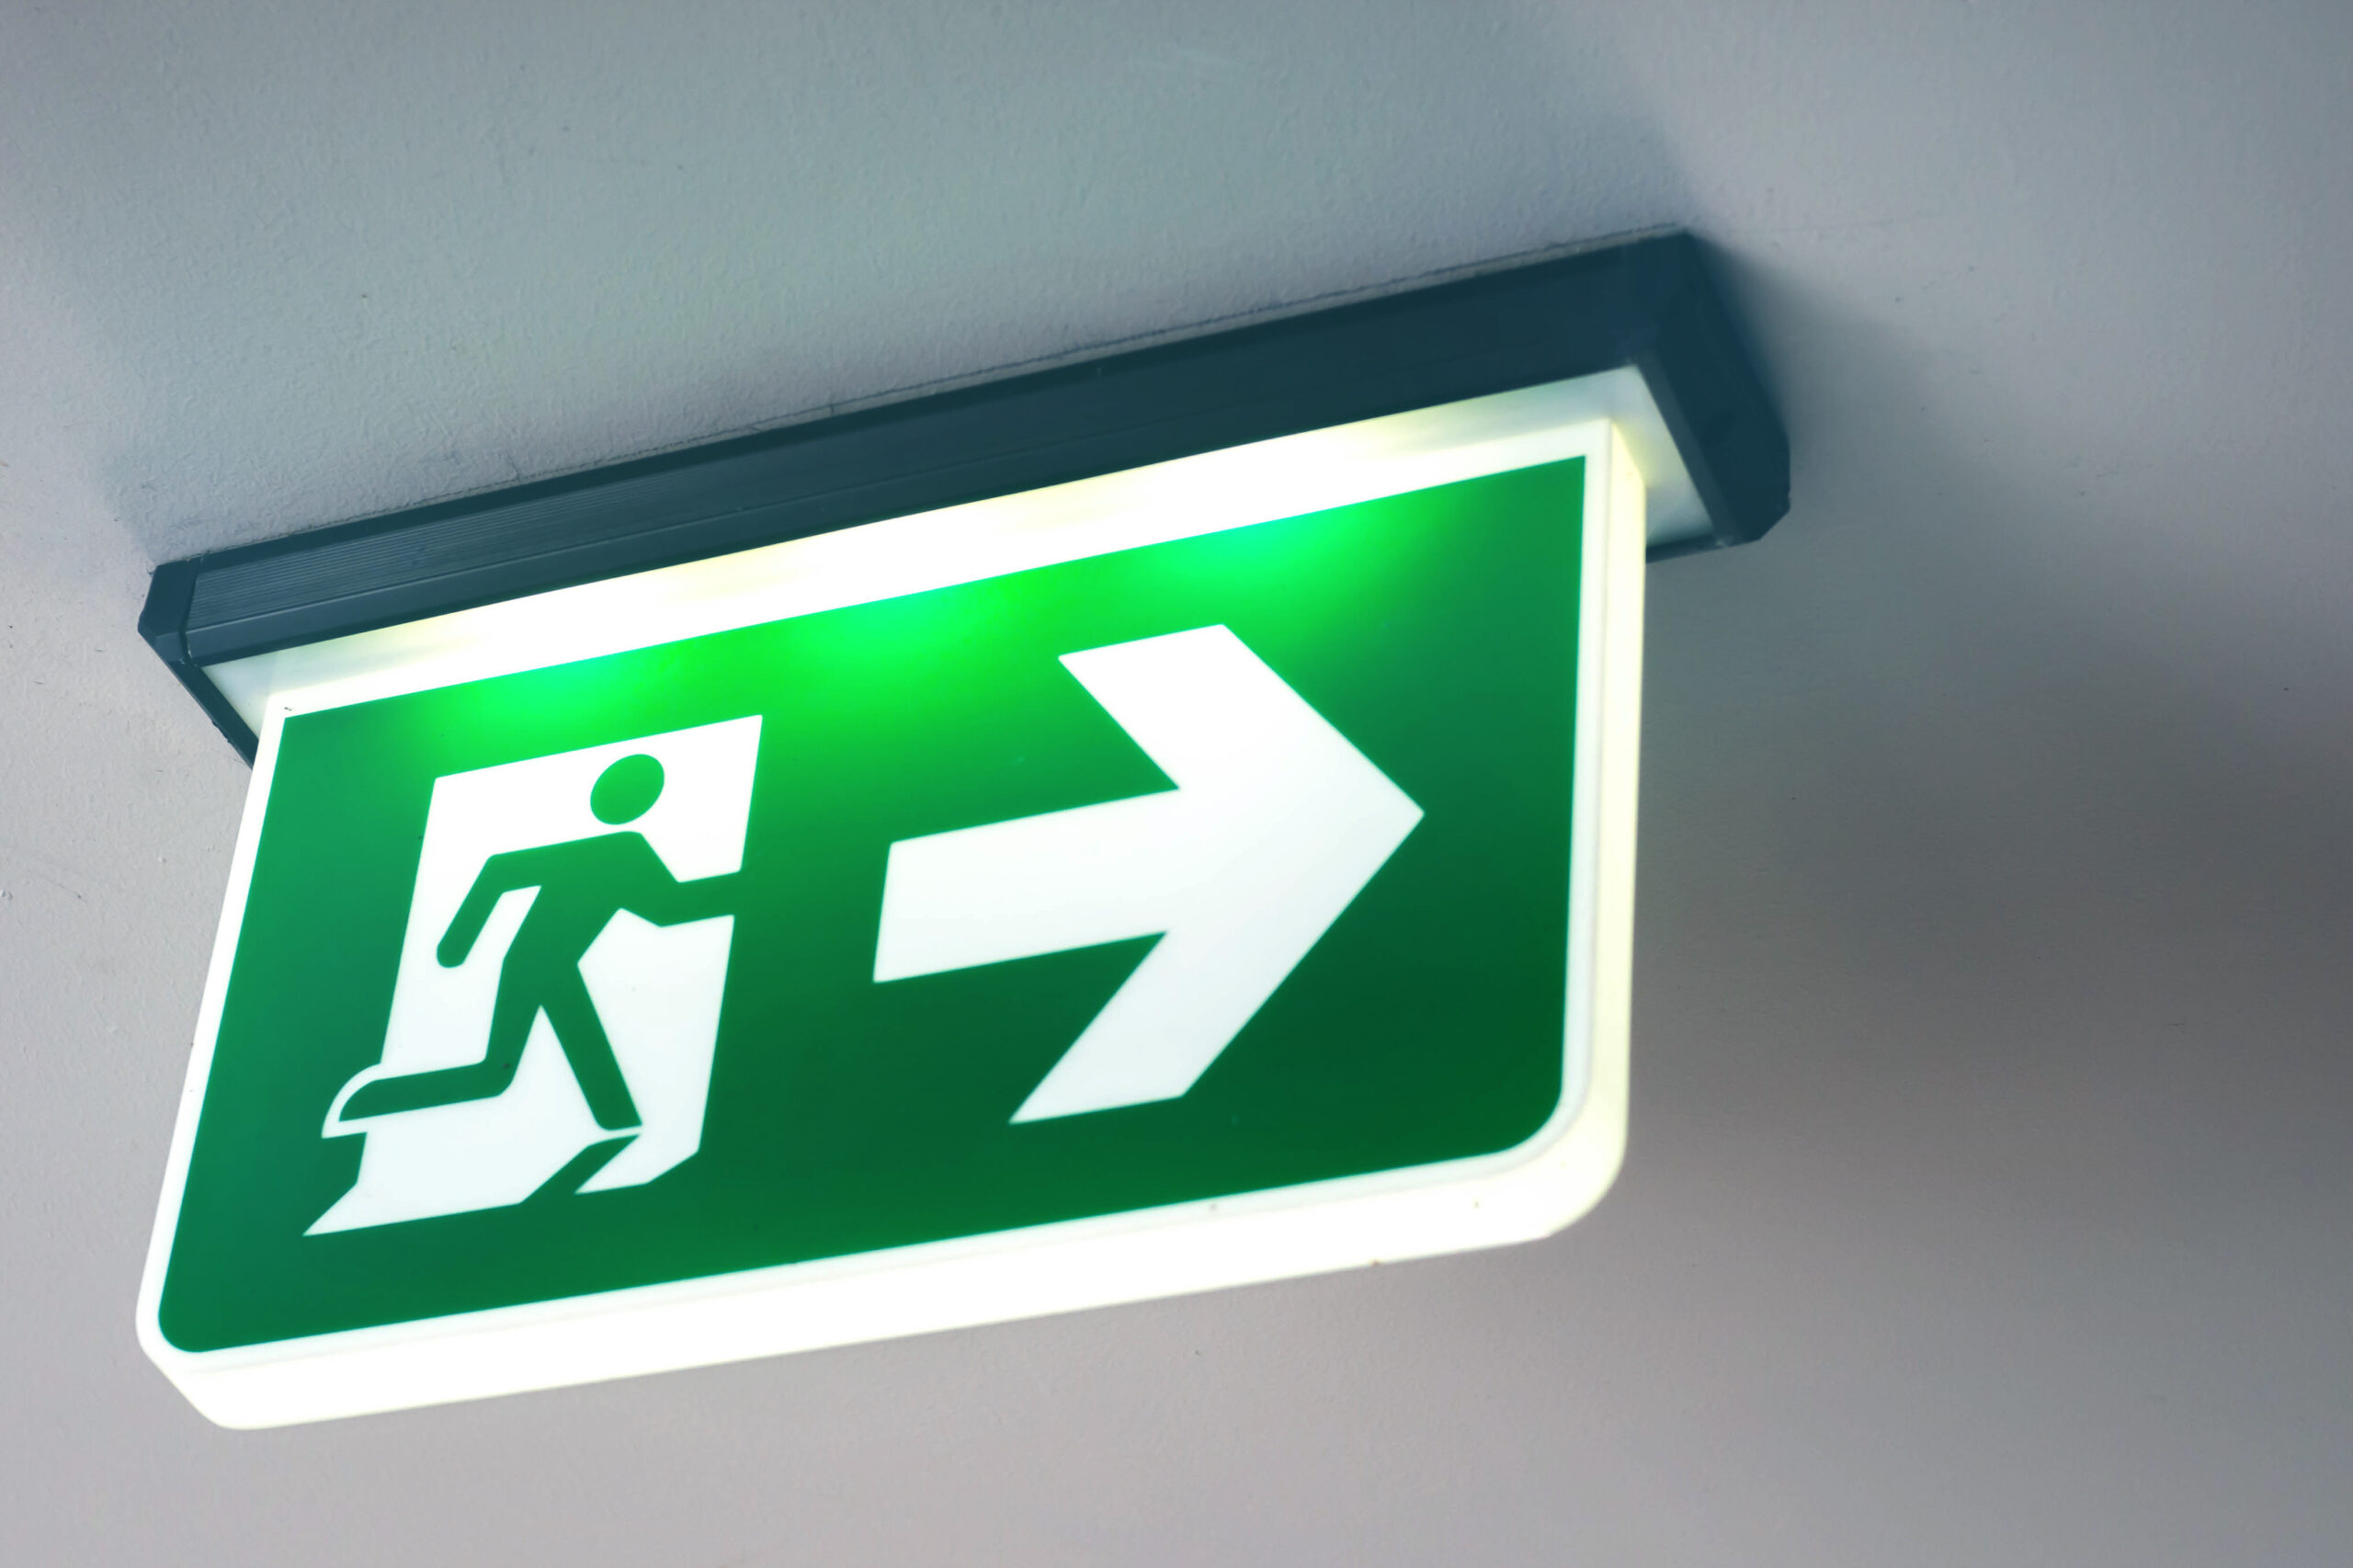 Fire exit sign hanging from ceiling